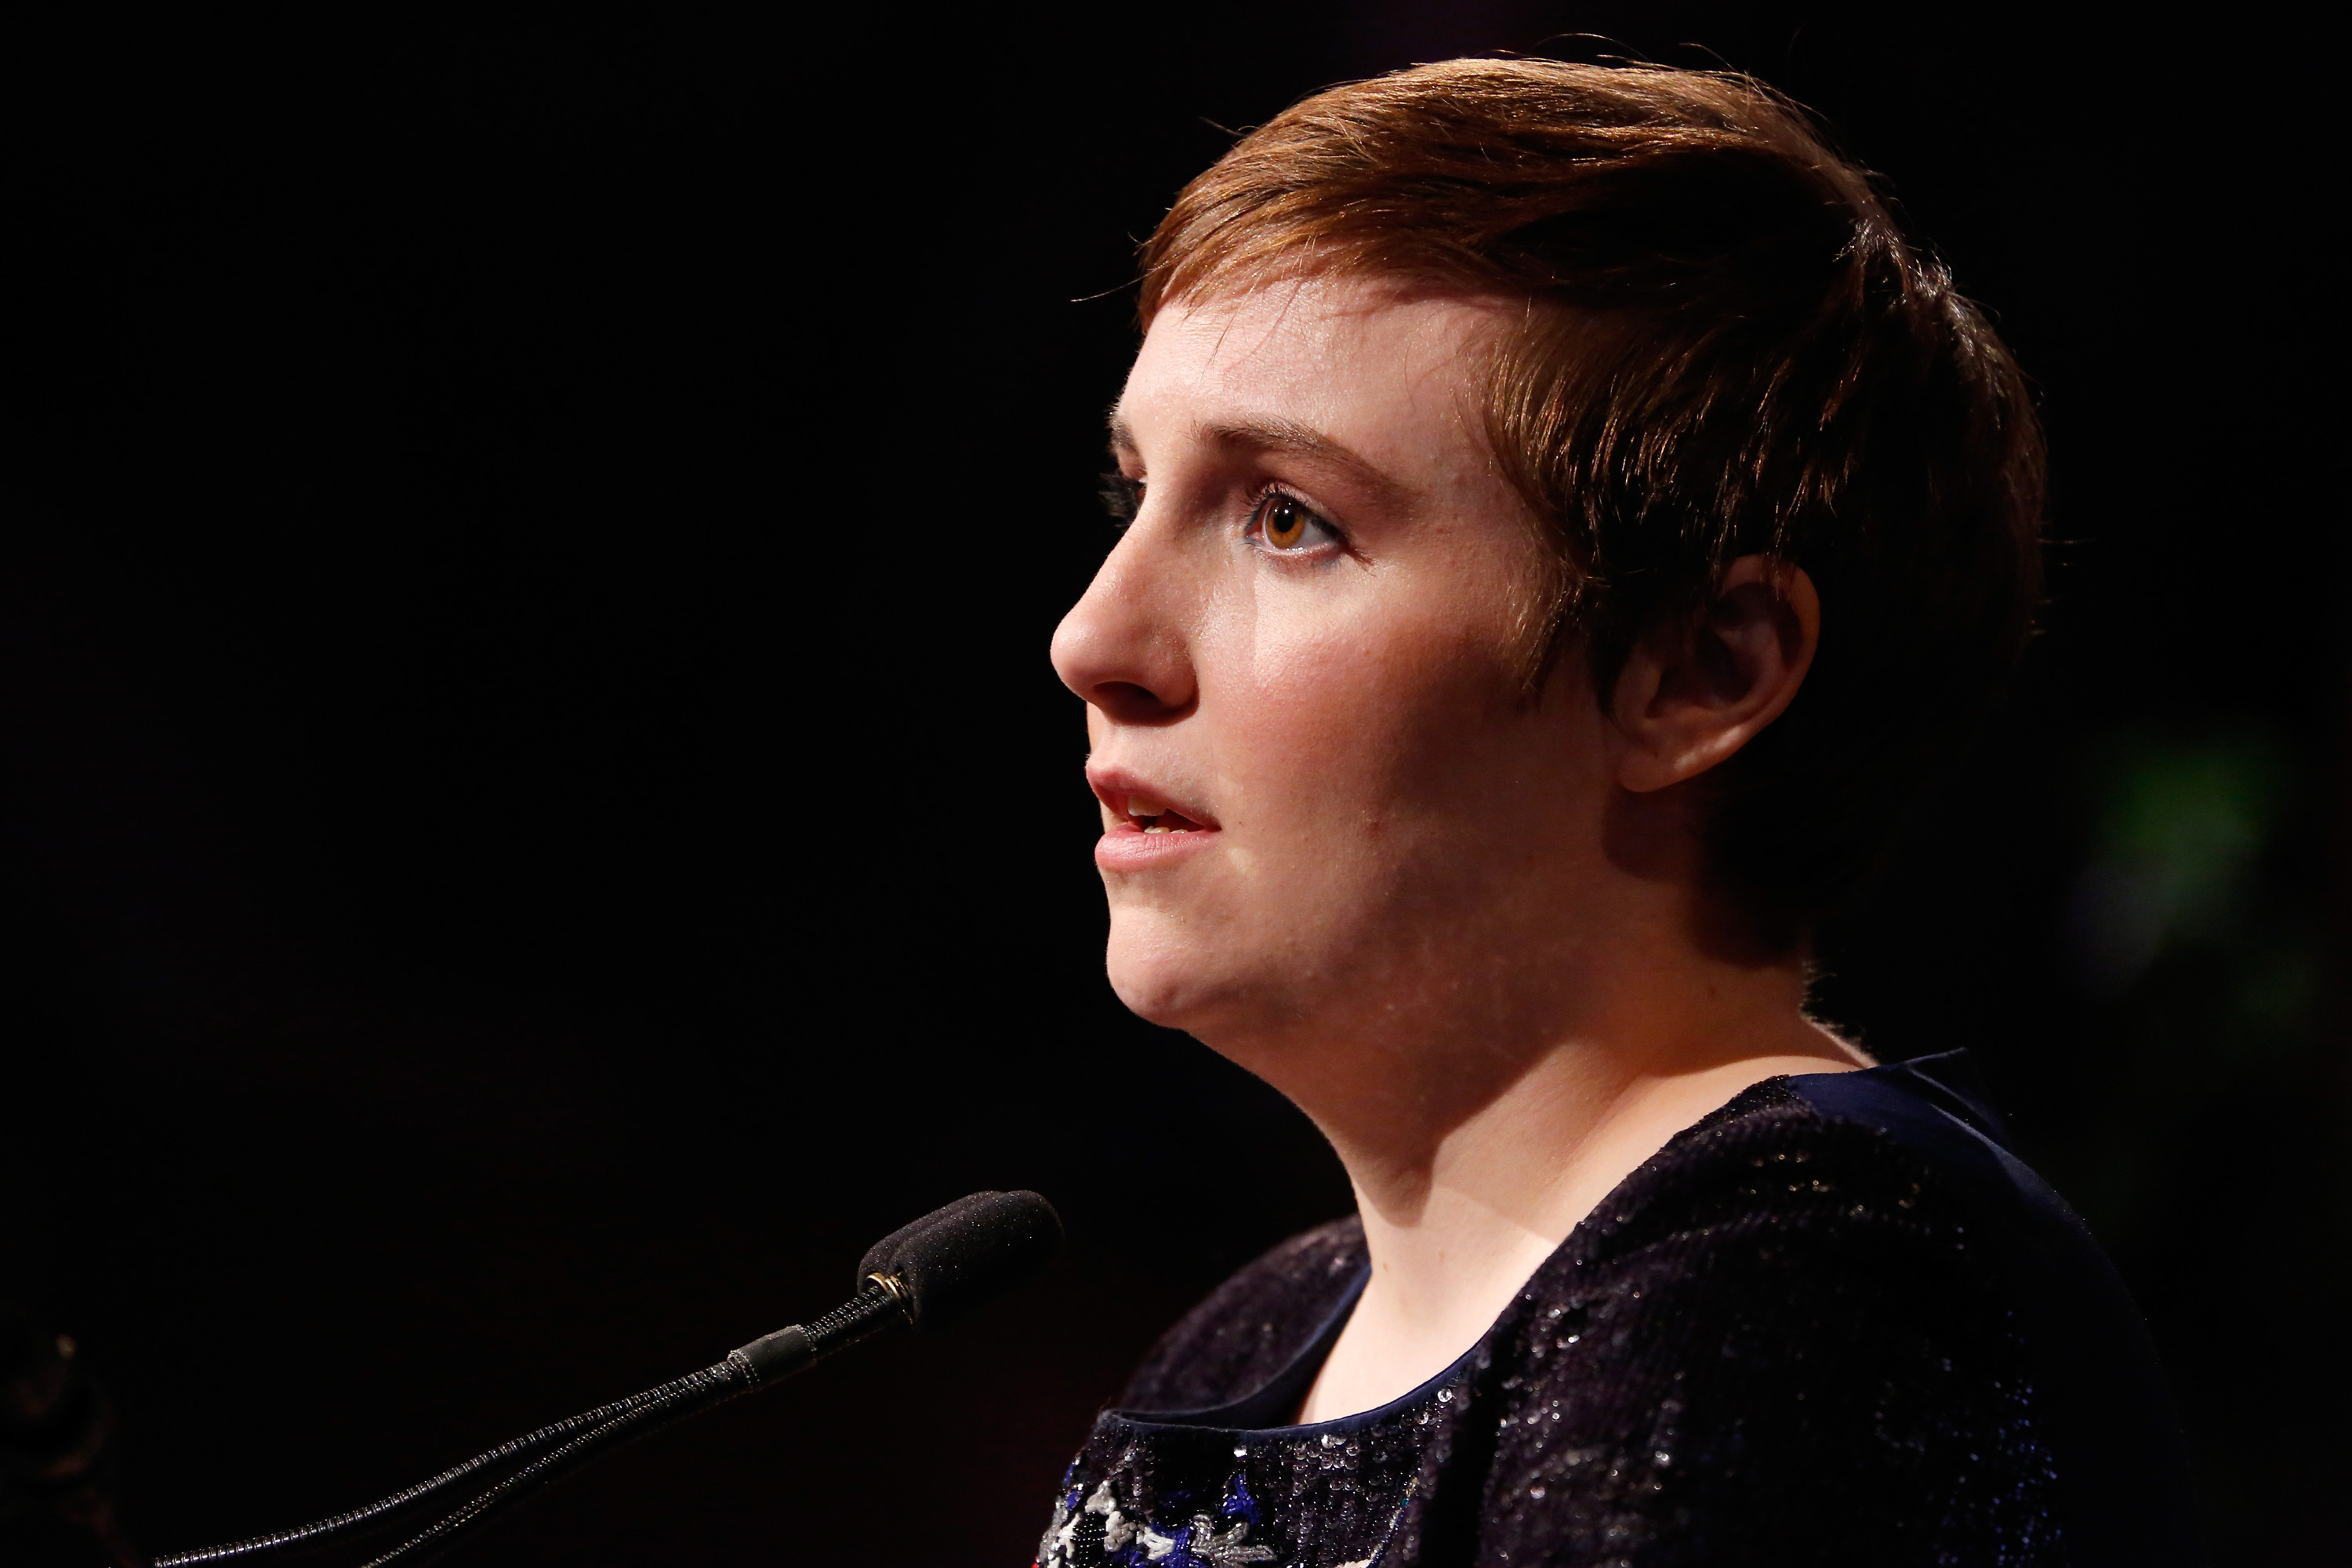 Honoree Lena Dunham speaks onstage at Variety's Power of Women: New York presented by Lifetime at Cipriani 42nd Street on April 24, 2015 in New York City. (Brian Ach—Getty Images)